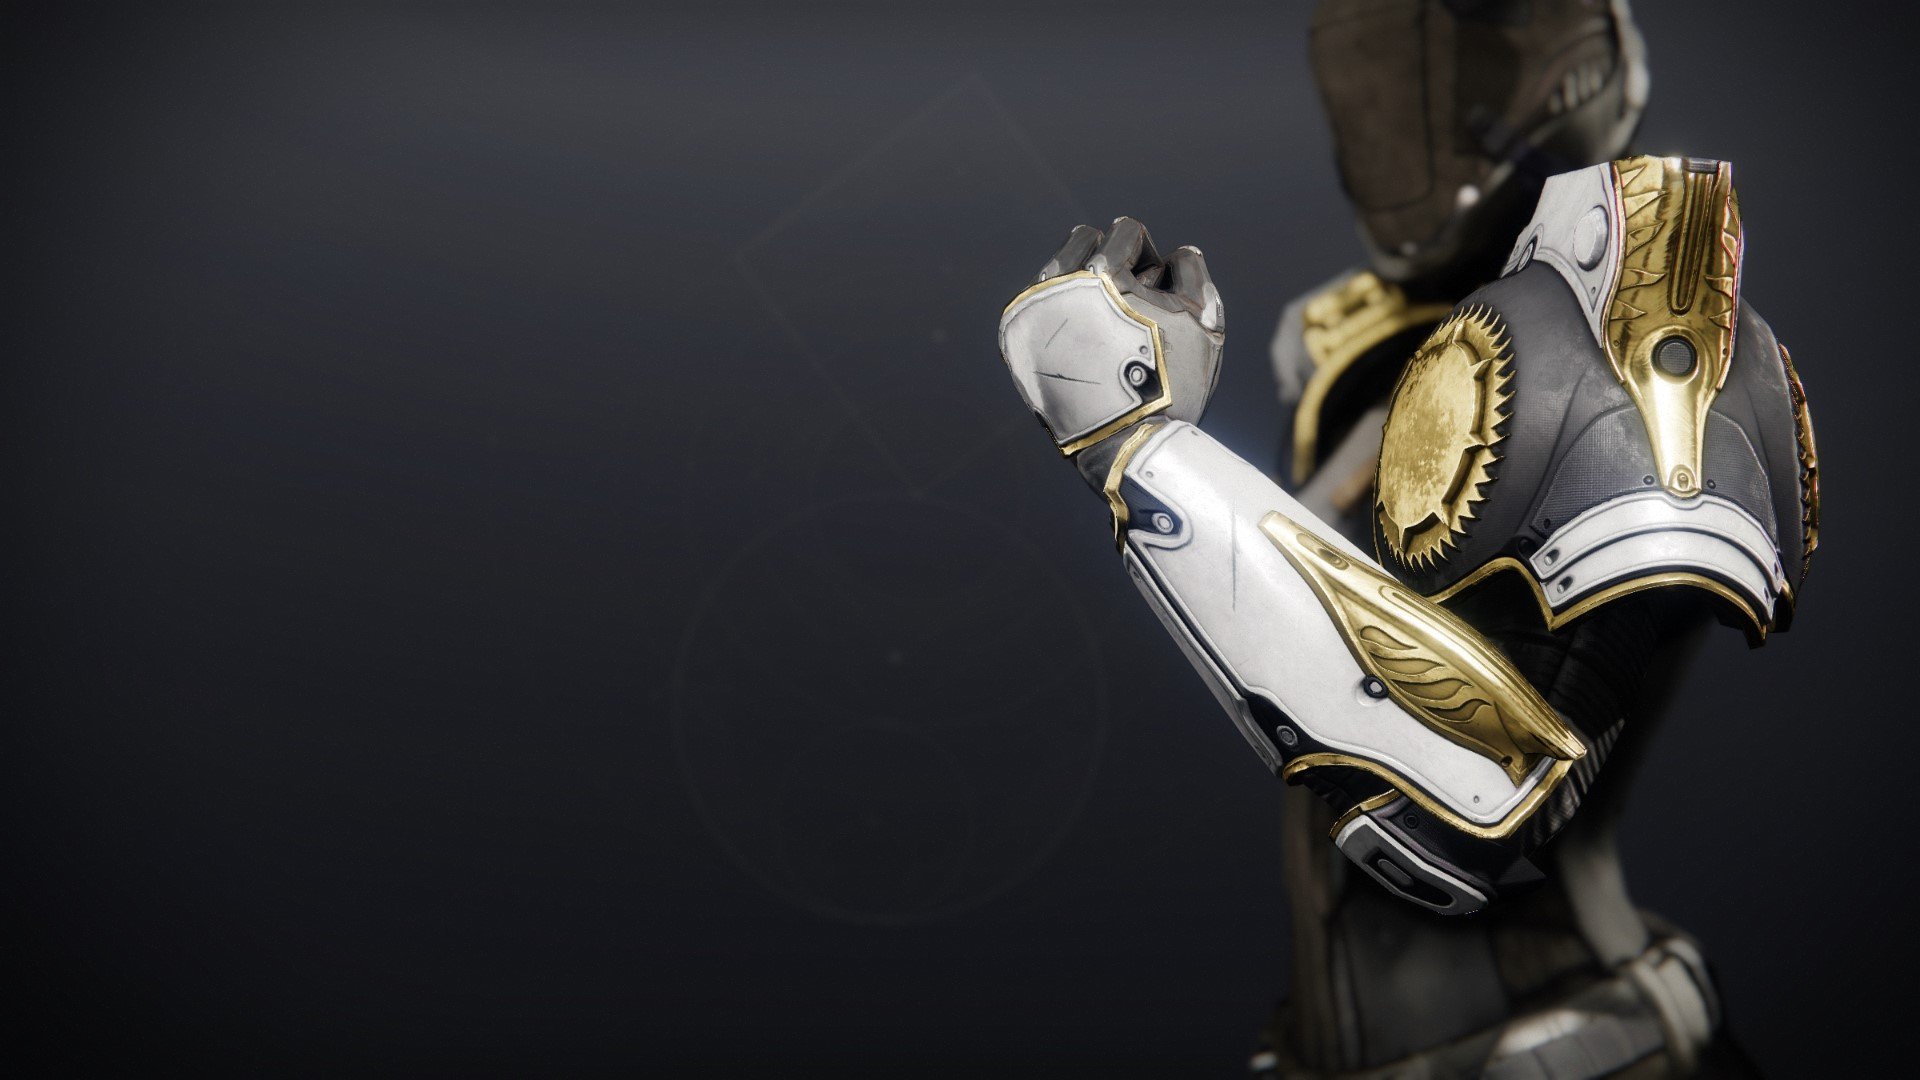 An in-game render of the Candescent Gauntlets.